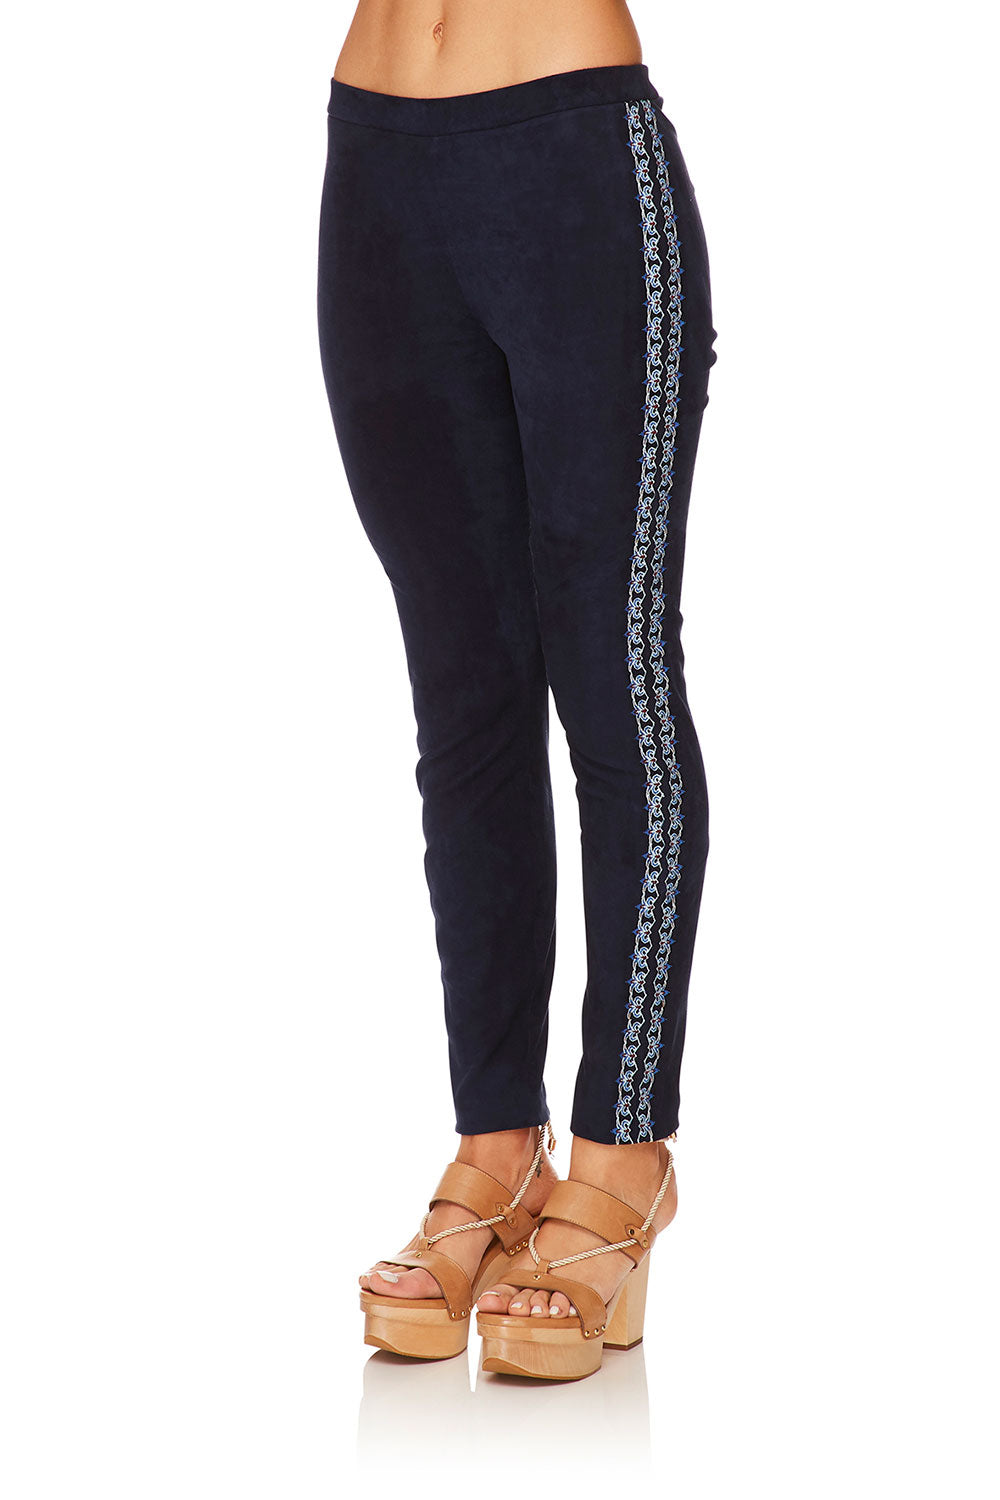 CAMILLA FOR THE FANS ELASTIC WAISTBAND SUEDE LEGGING